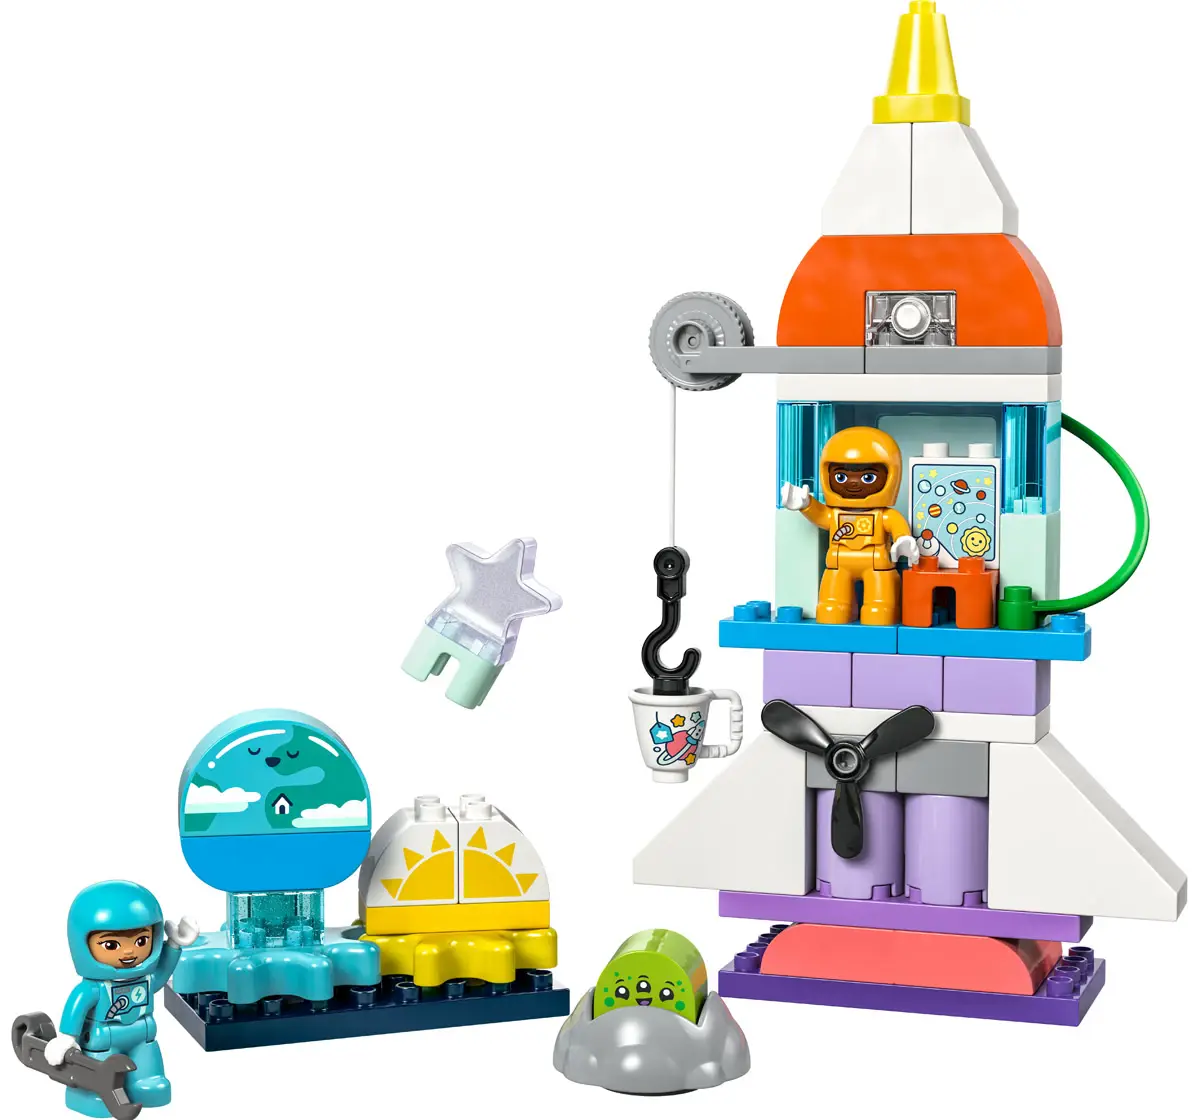 Lego Duplo 3In1 Space Shuttle Adventure Toy 10422 Multicolour For Kids Ages 3Y+ (58 Pieces) 